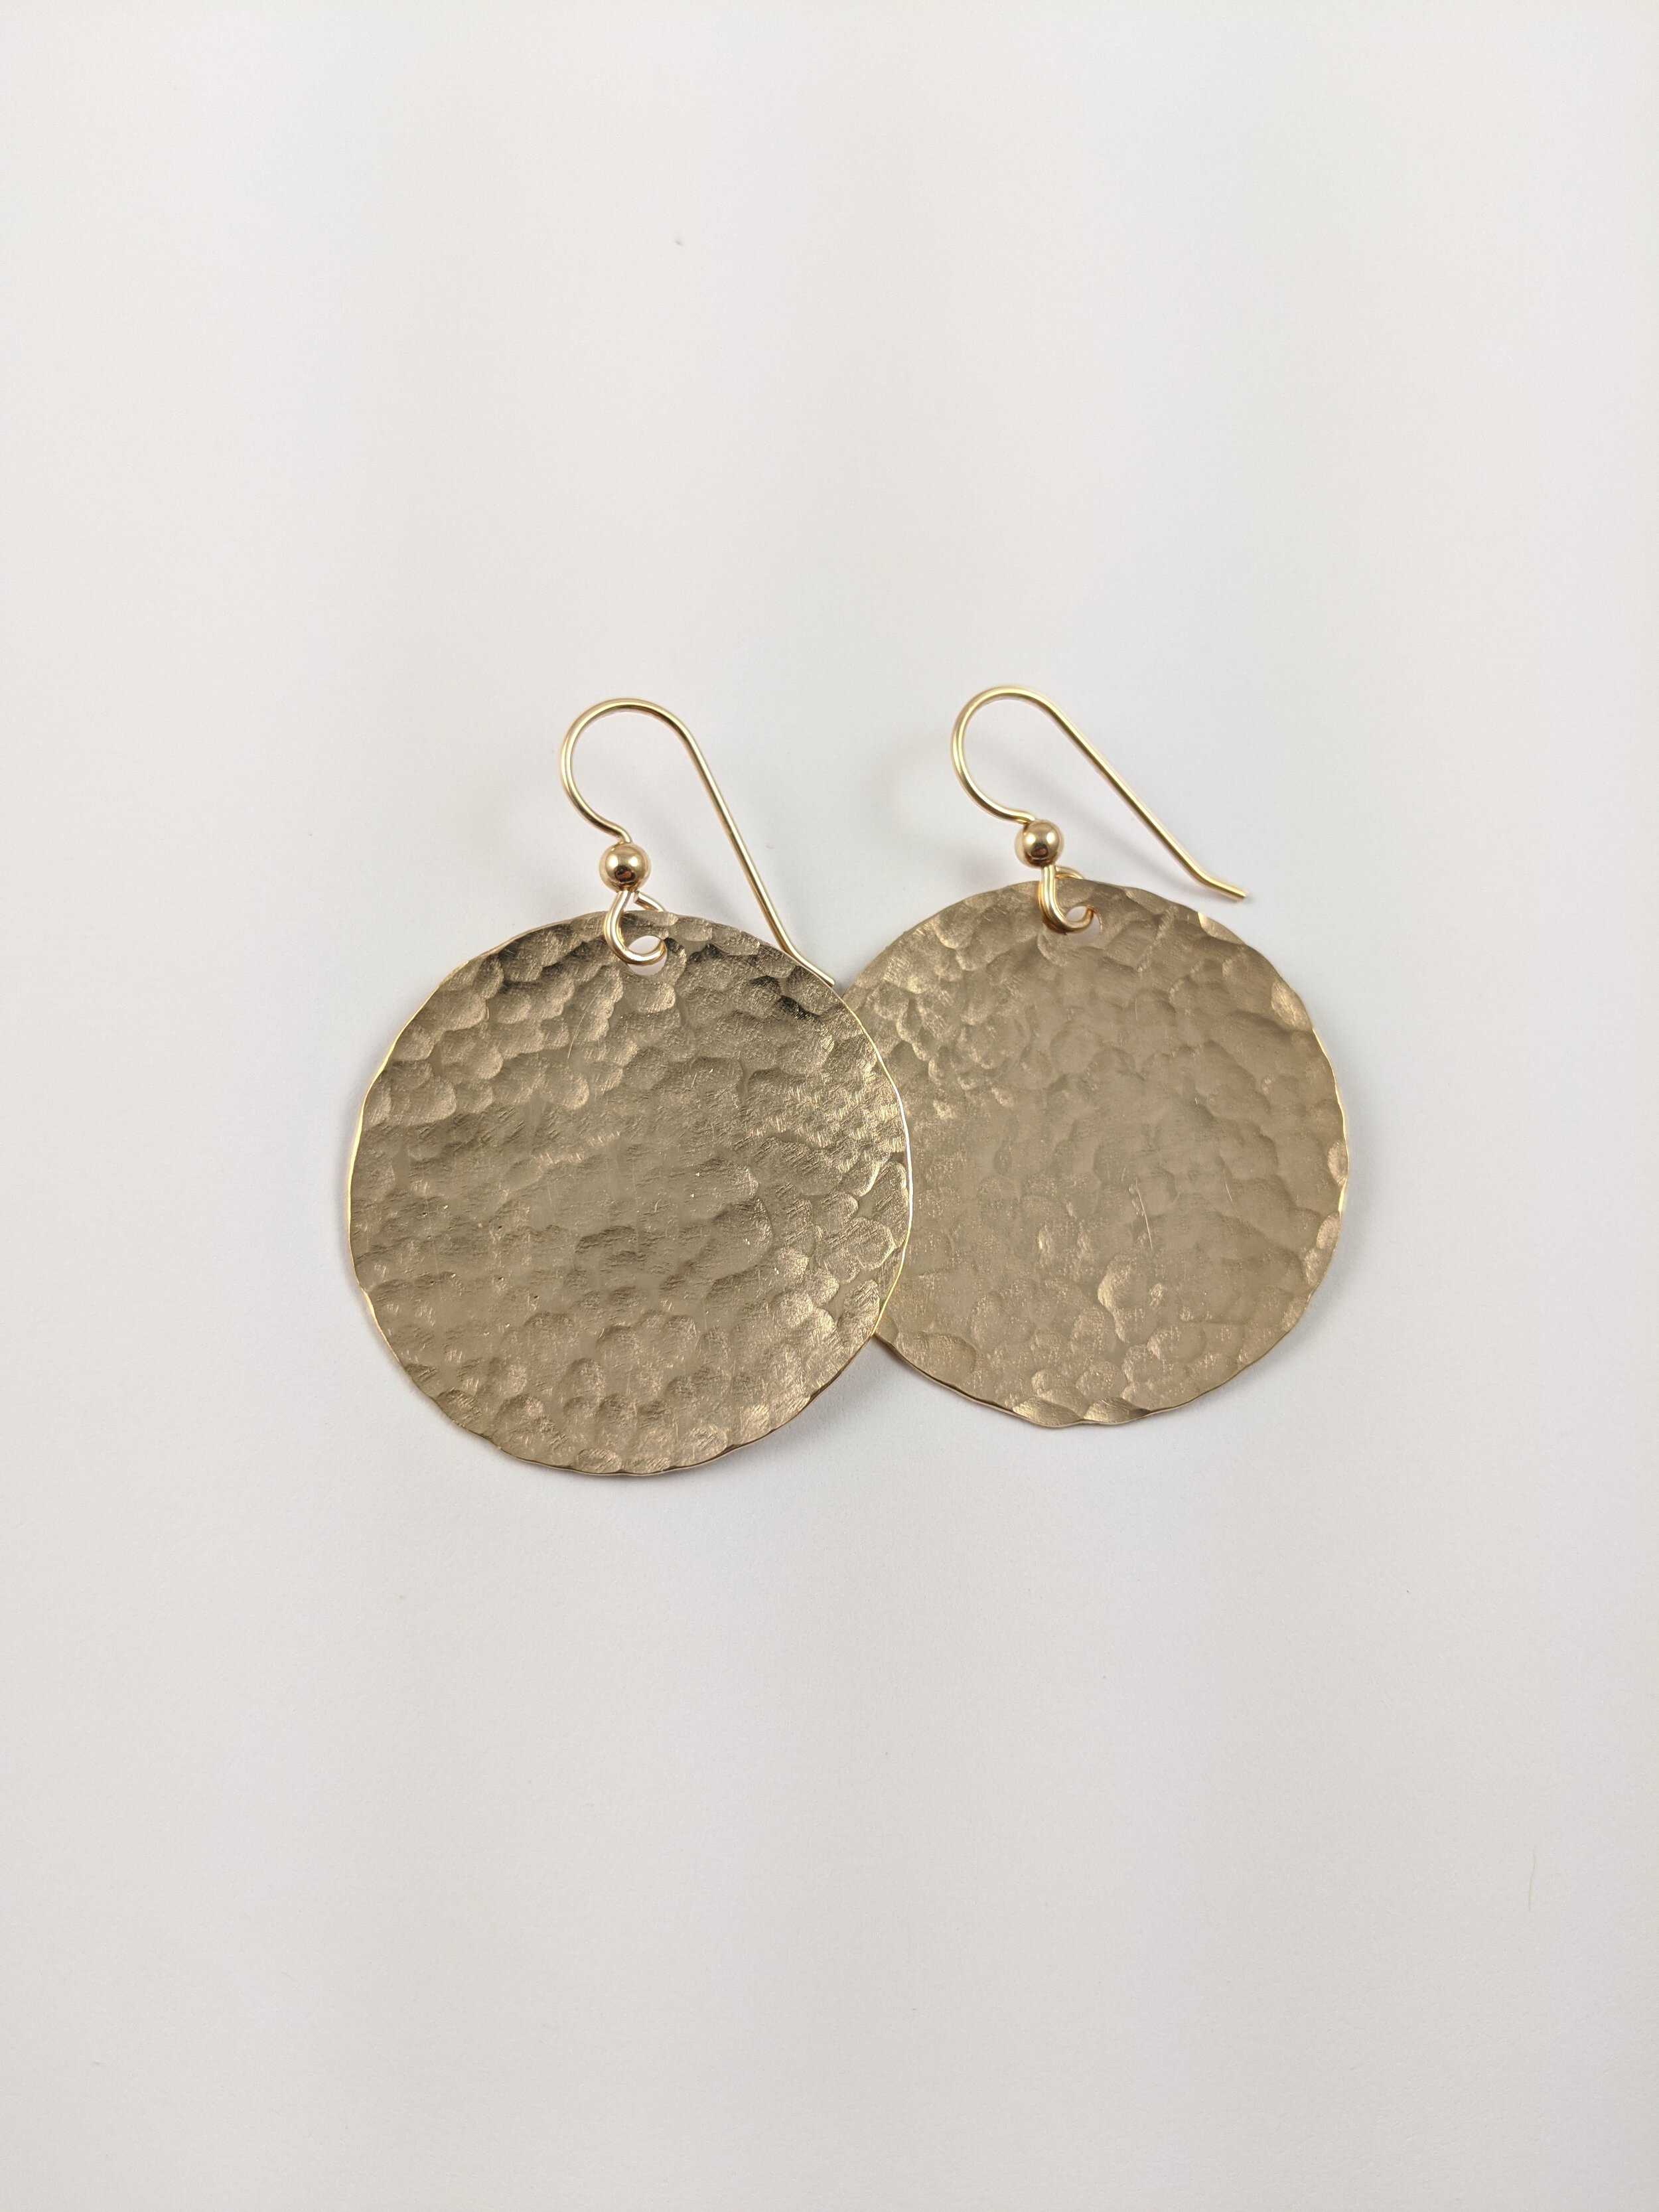 Hammered Gold Earrings, Small Gold Disc Earrings, Minimalist Jewelry,  Everyday Leverback Lever back, Simple Jewelry, Tiny Gold Earrings